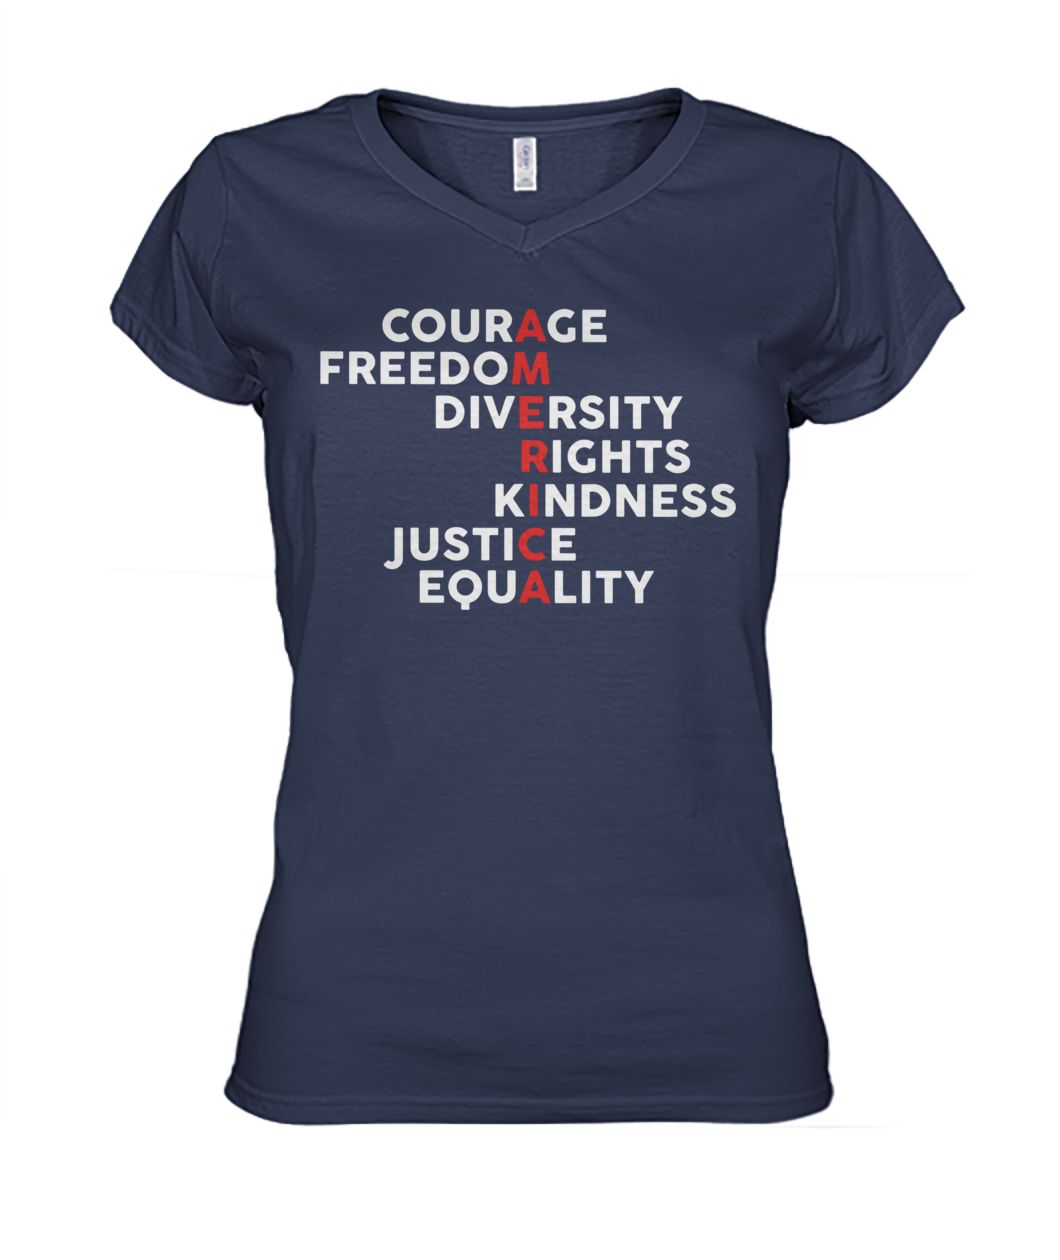 Courage freedom diversity diversity rights kindness justice equality women's v-neck